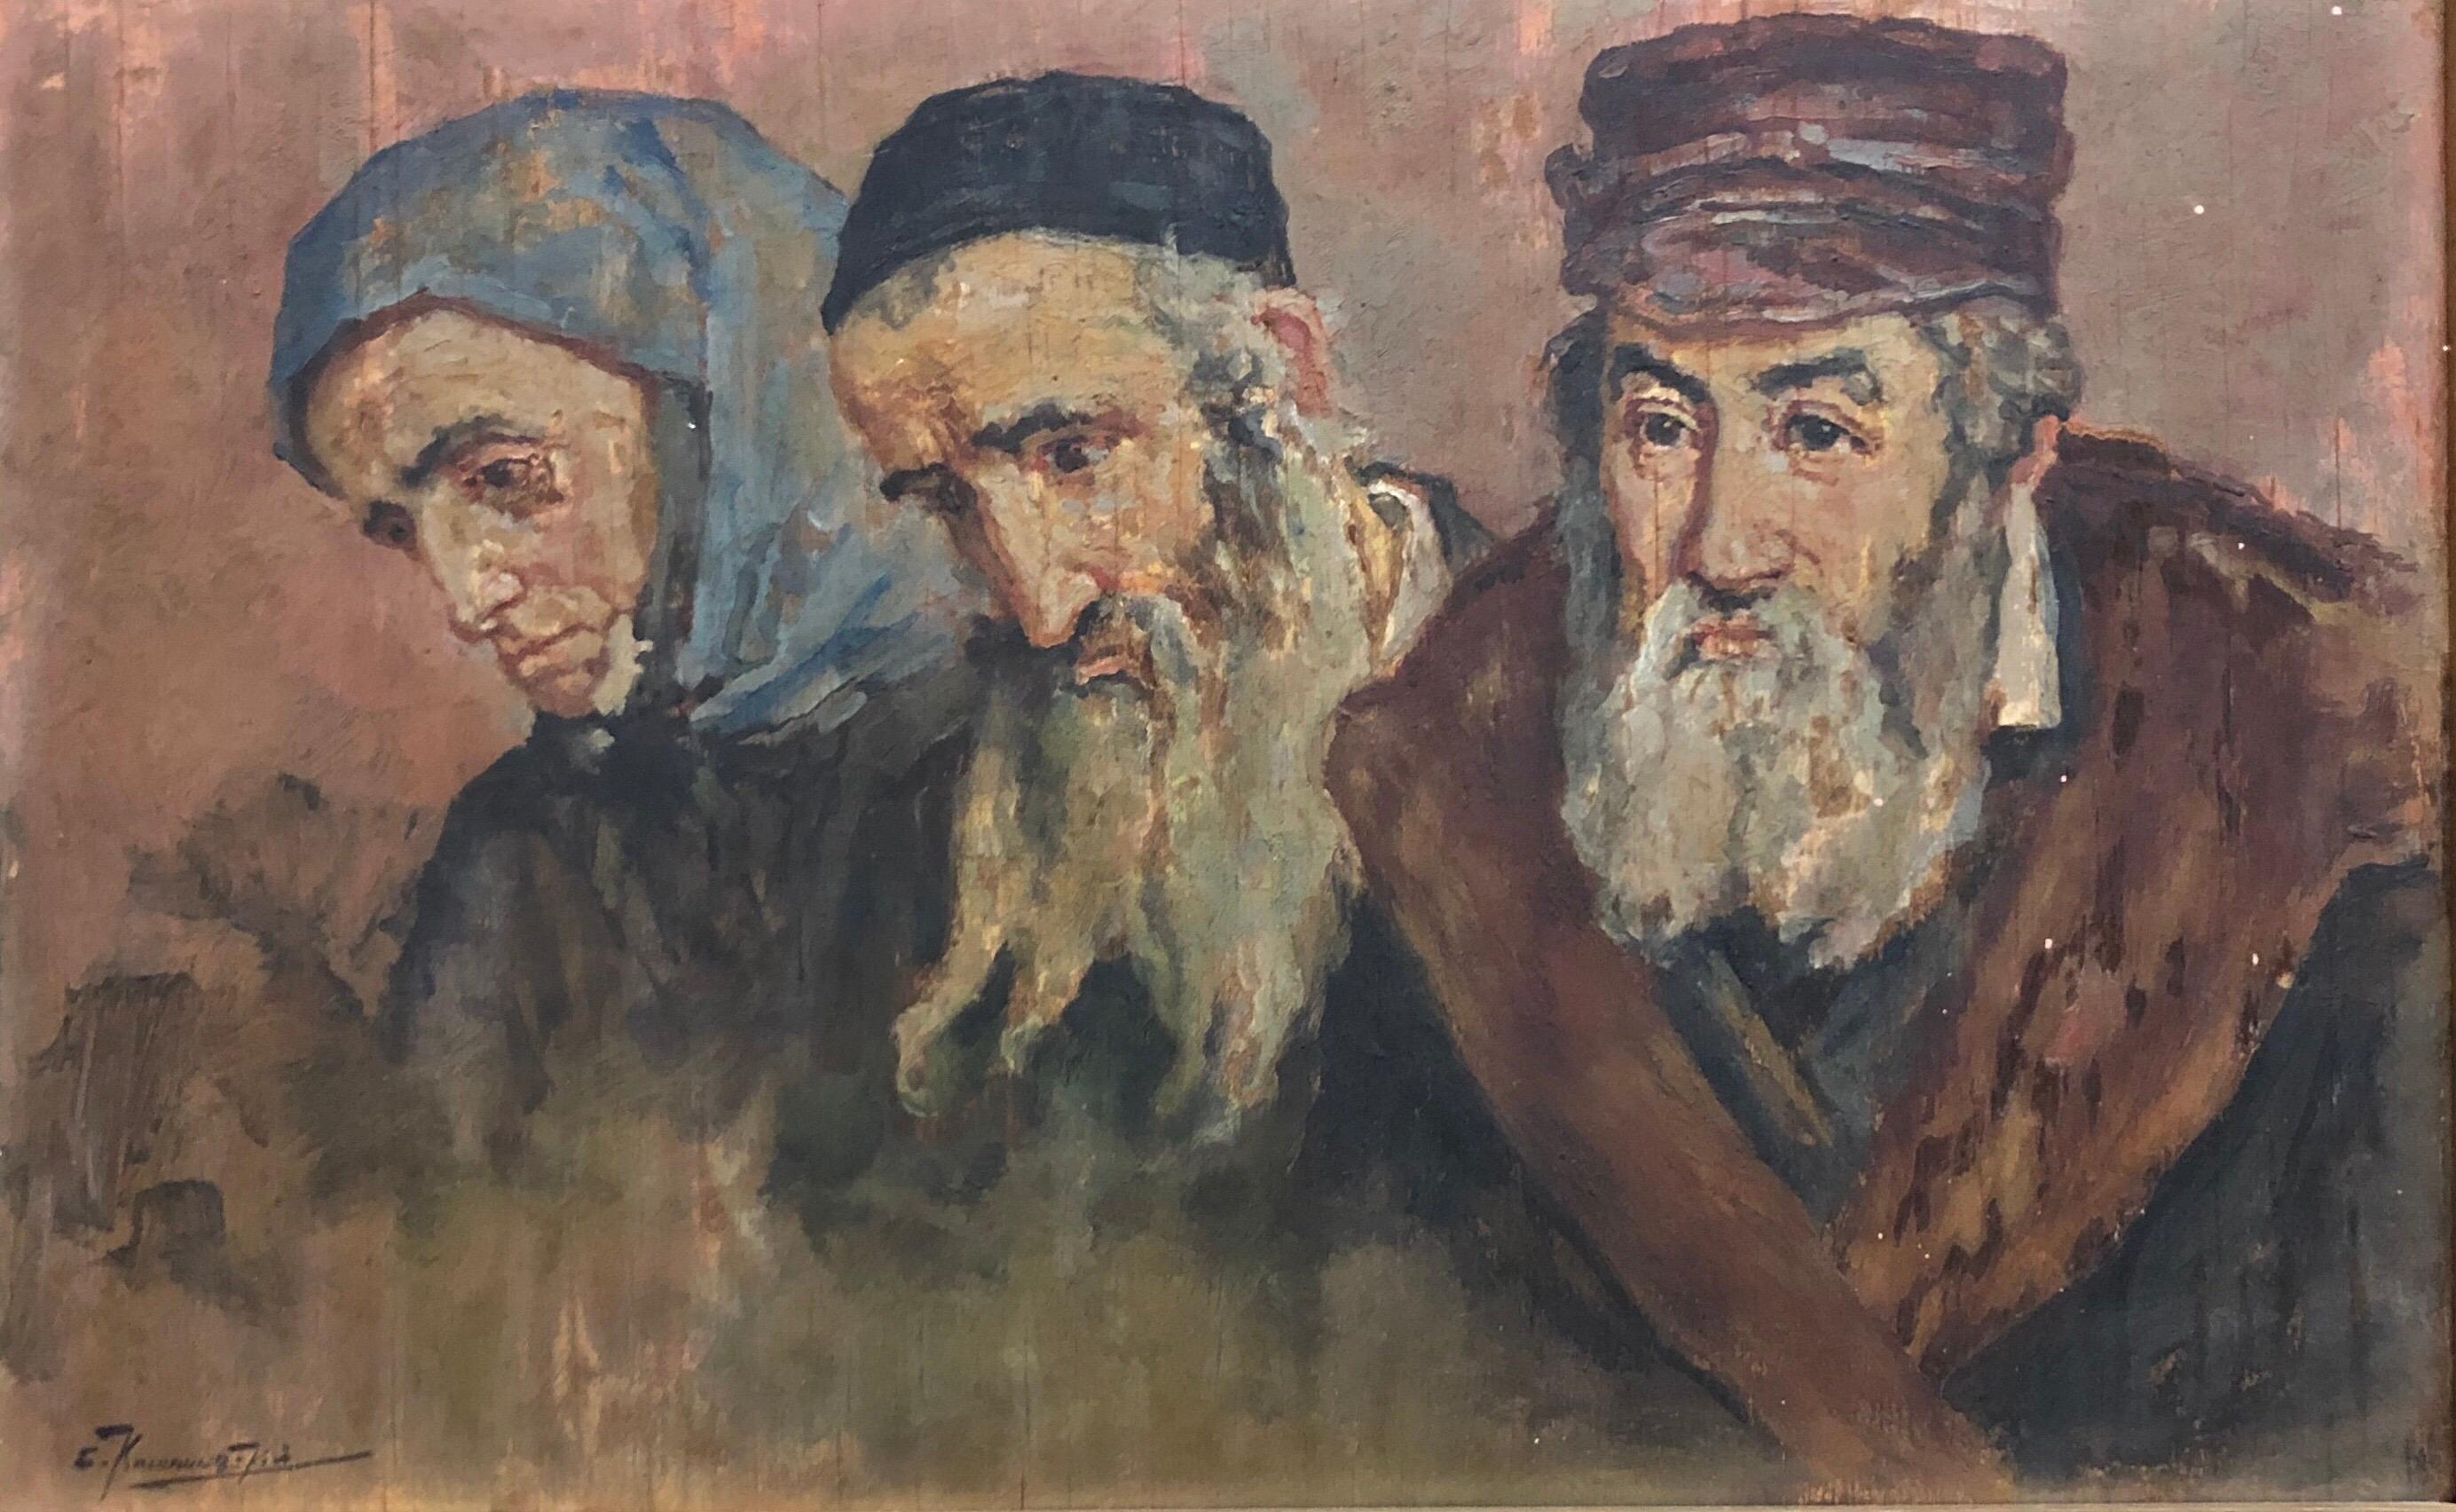 
In the tradition of the Jewish European artists of the 19th and early 20th centuries, such as Moritz Oppenheim, Max Liebermann, Lesser Ury, Jakob Steinhardt, Jehudo Epstein, Stanislaus Bender, Abel Pann, Leopold Pilichowsky, Hermann Struck, Joseph